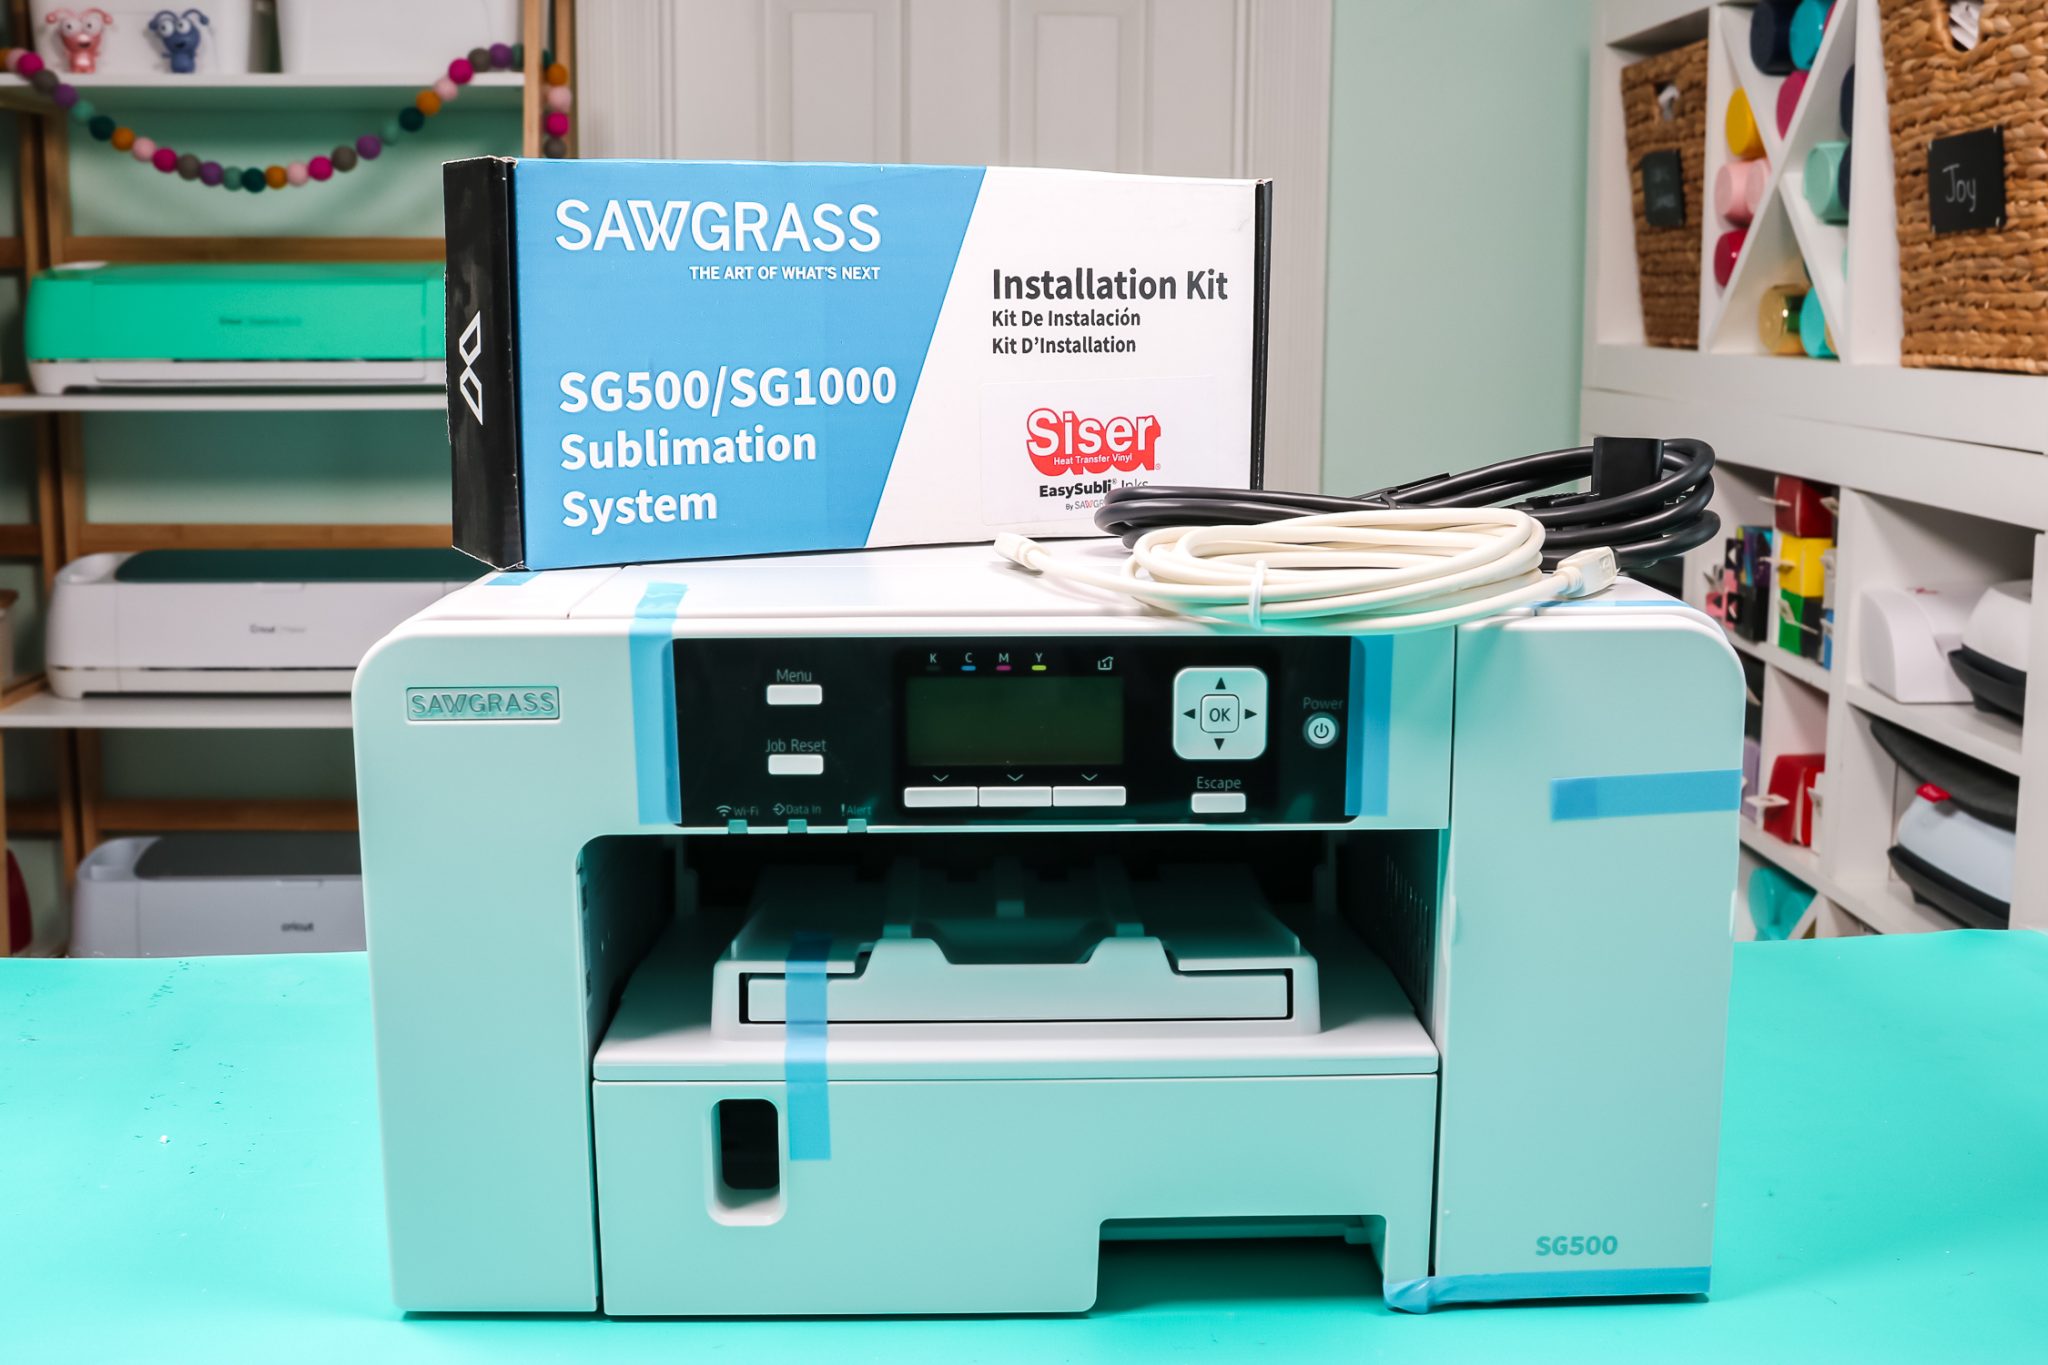 Sublimation Ink for Epson Printer, EcoTank, and Sawgrass